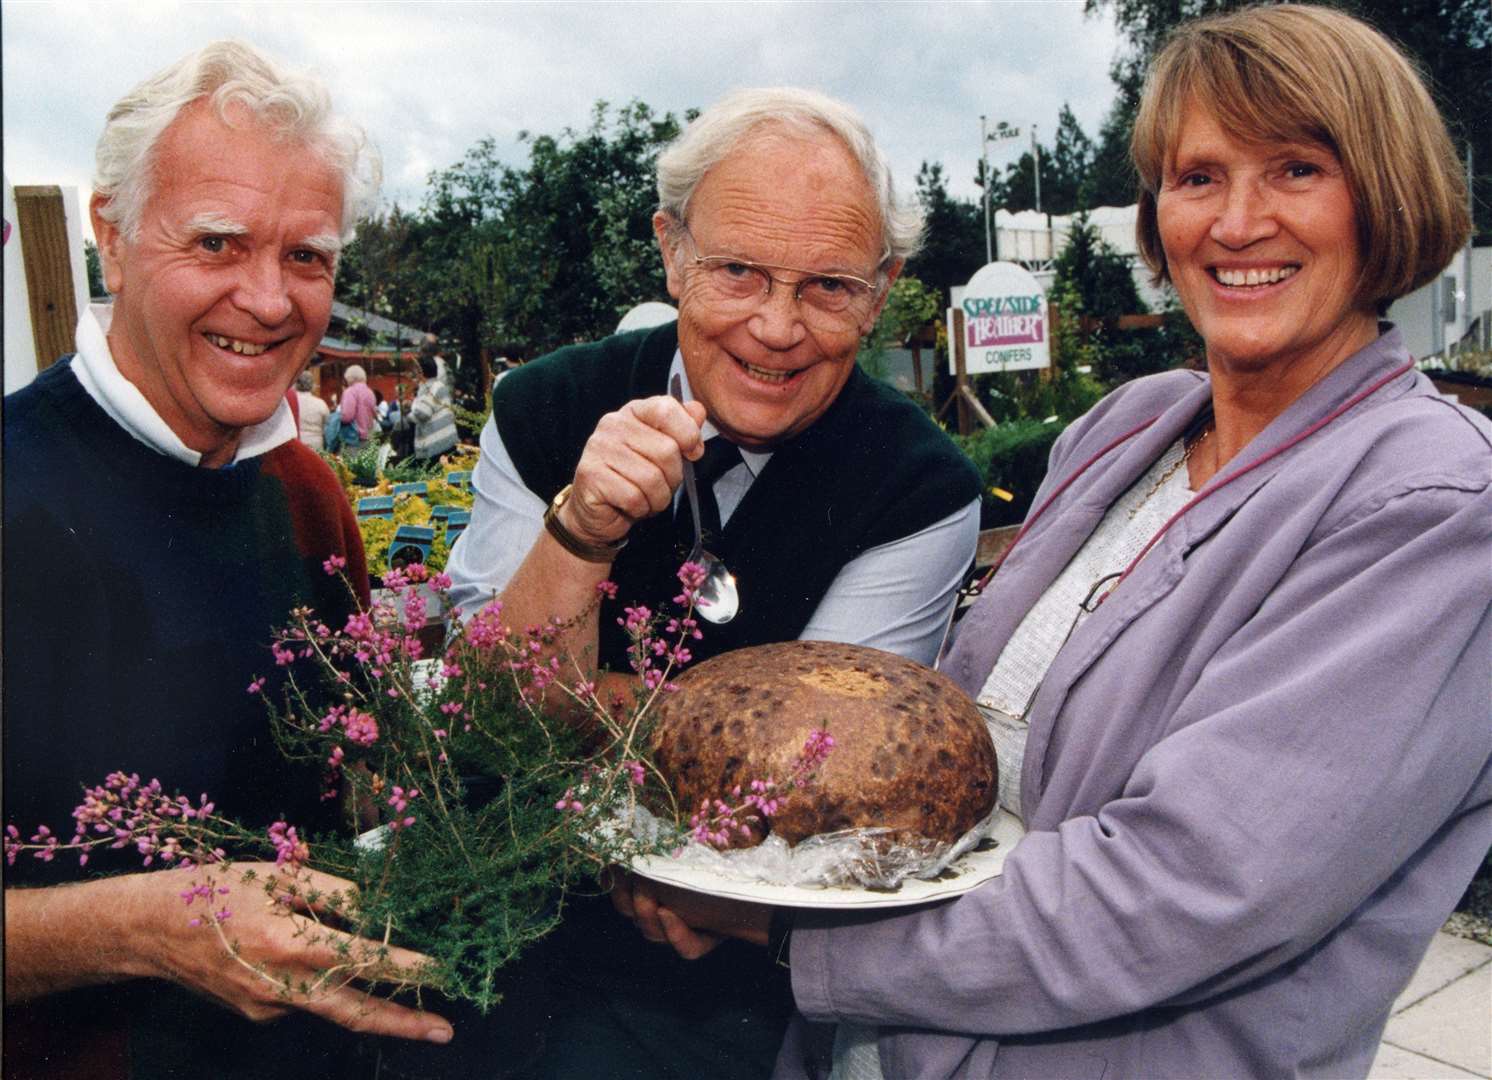 David and Betty sampling the famous Clootie Dumpling with Jim McColl of Beechgrove Garden fame at a fundraising day.